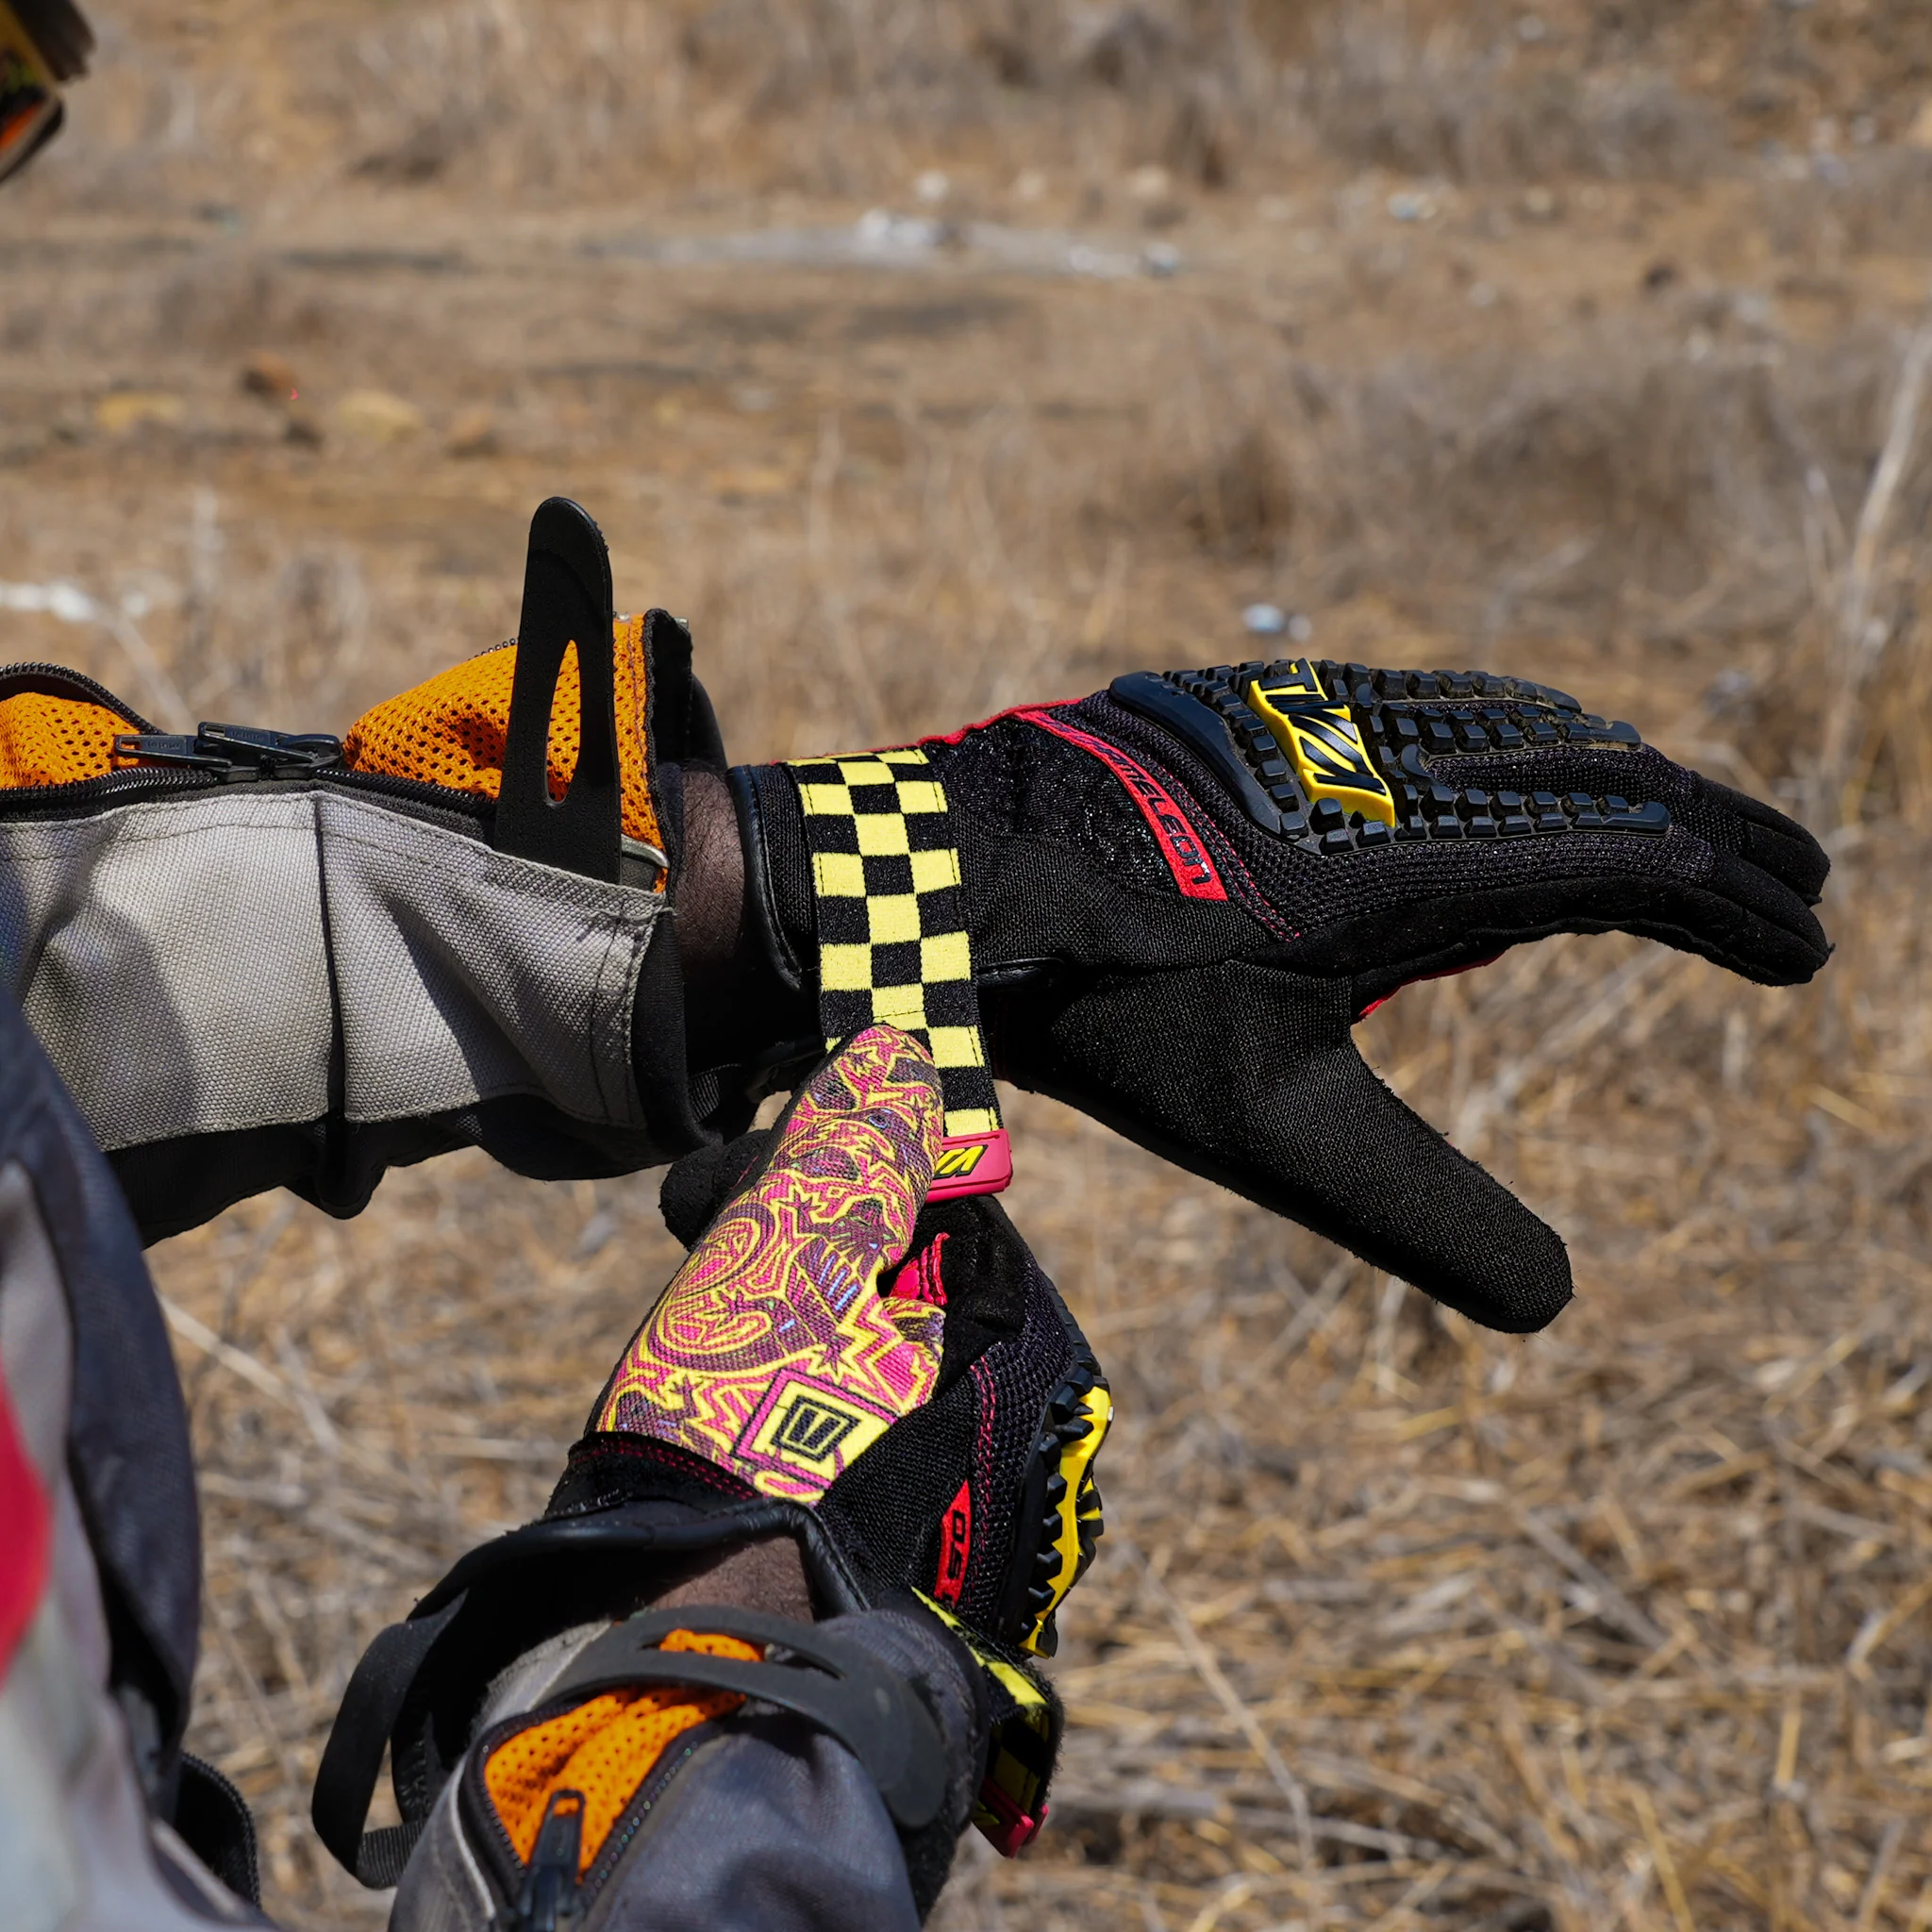 Tiivra Ds Apex Motorcycle Riding Gloves